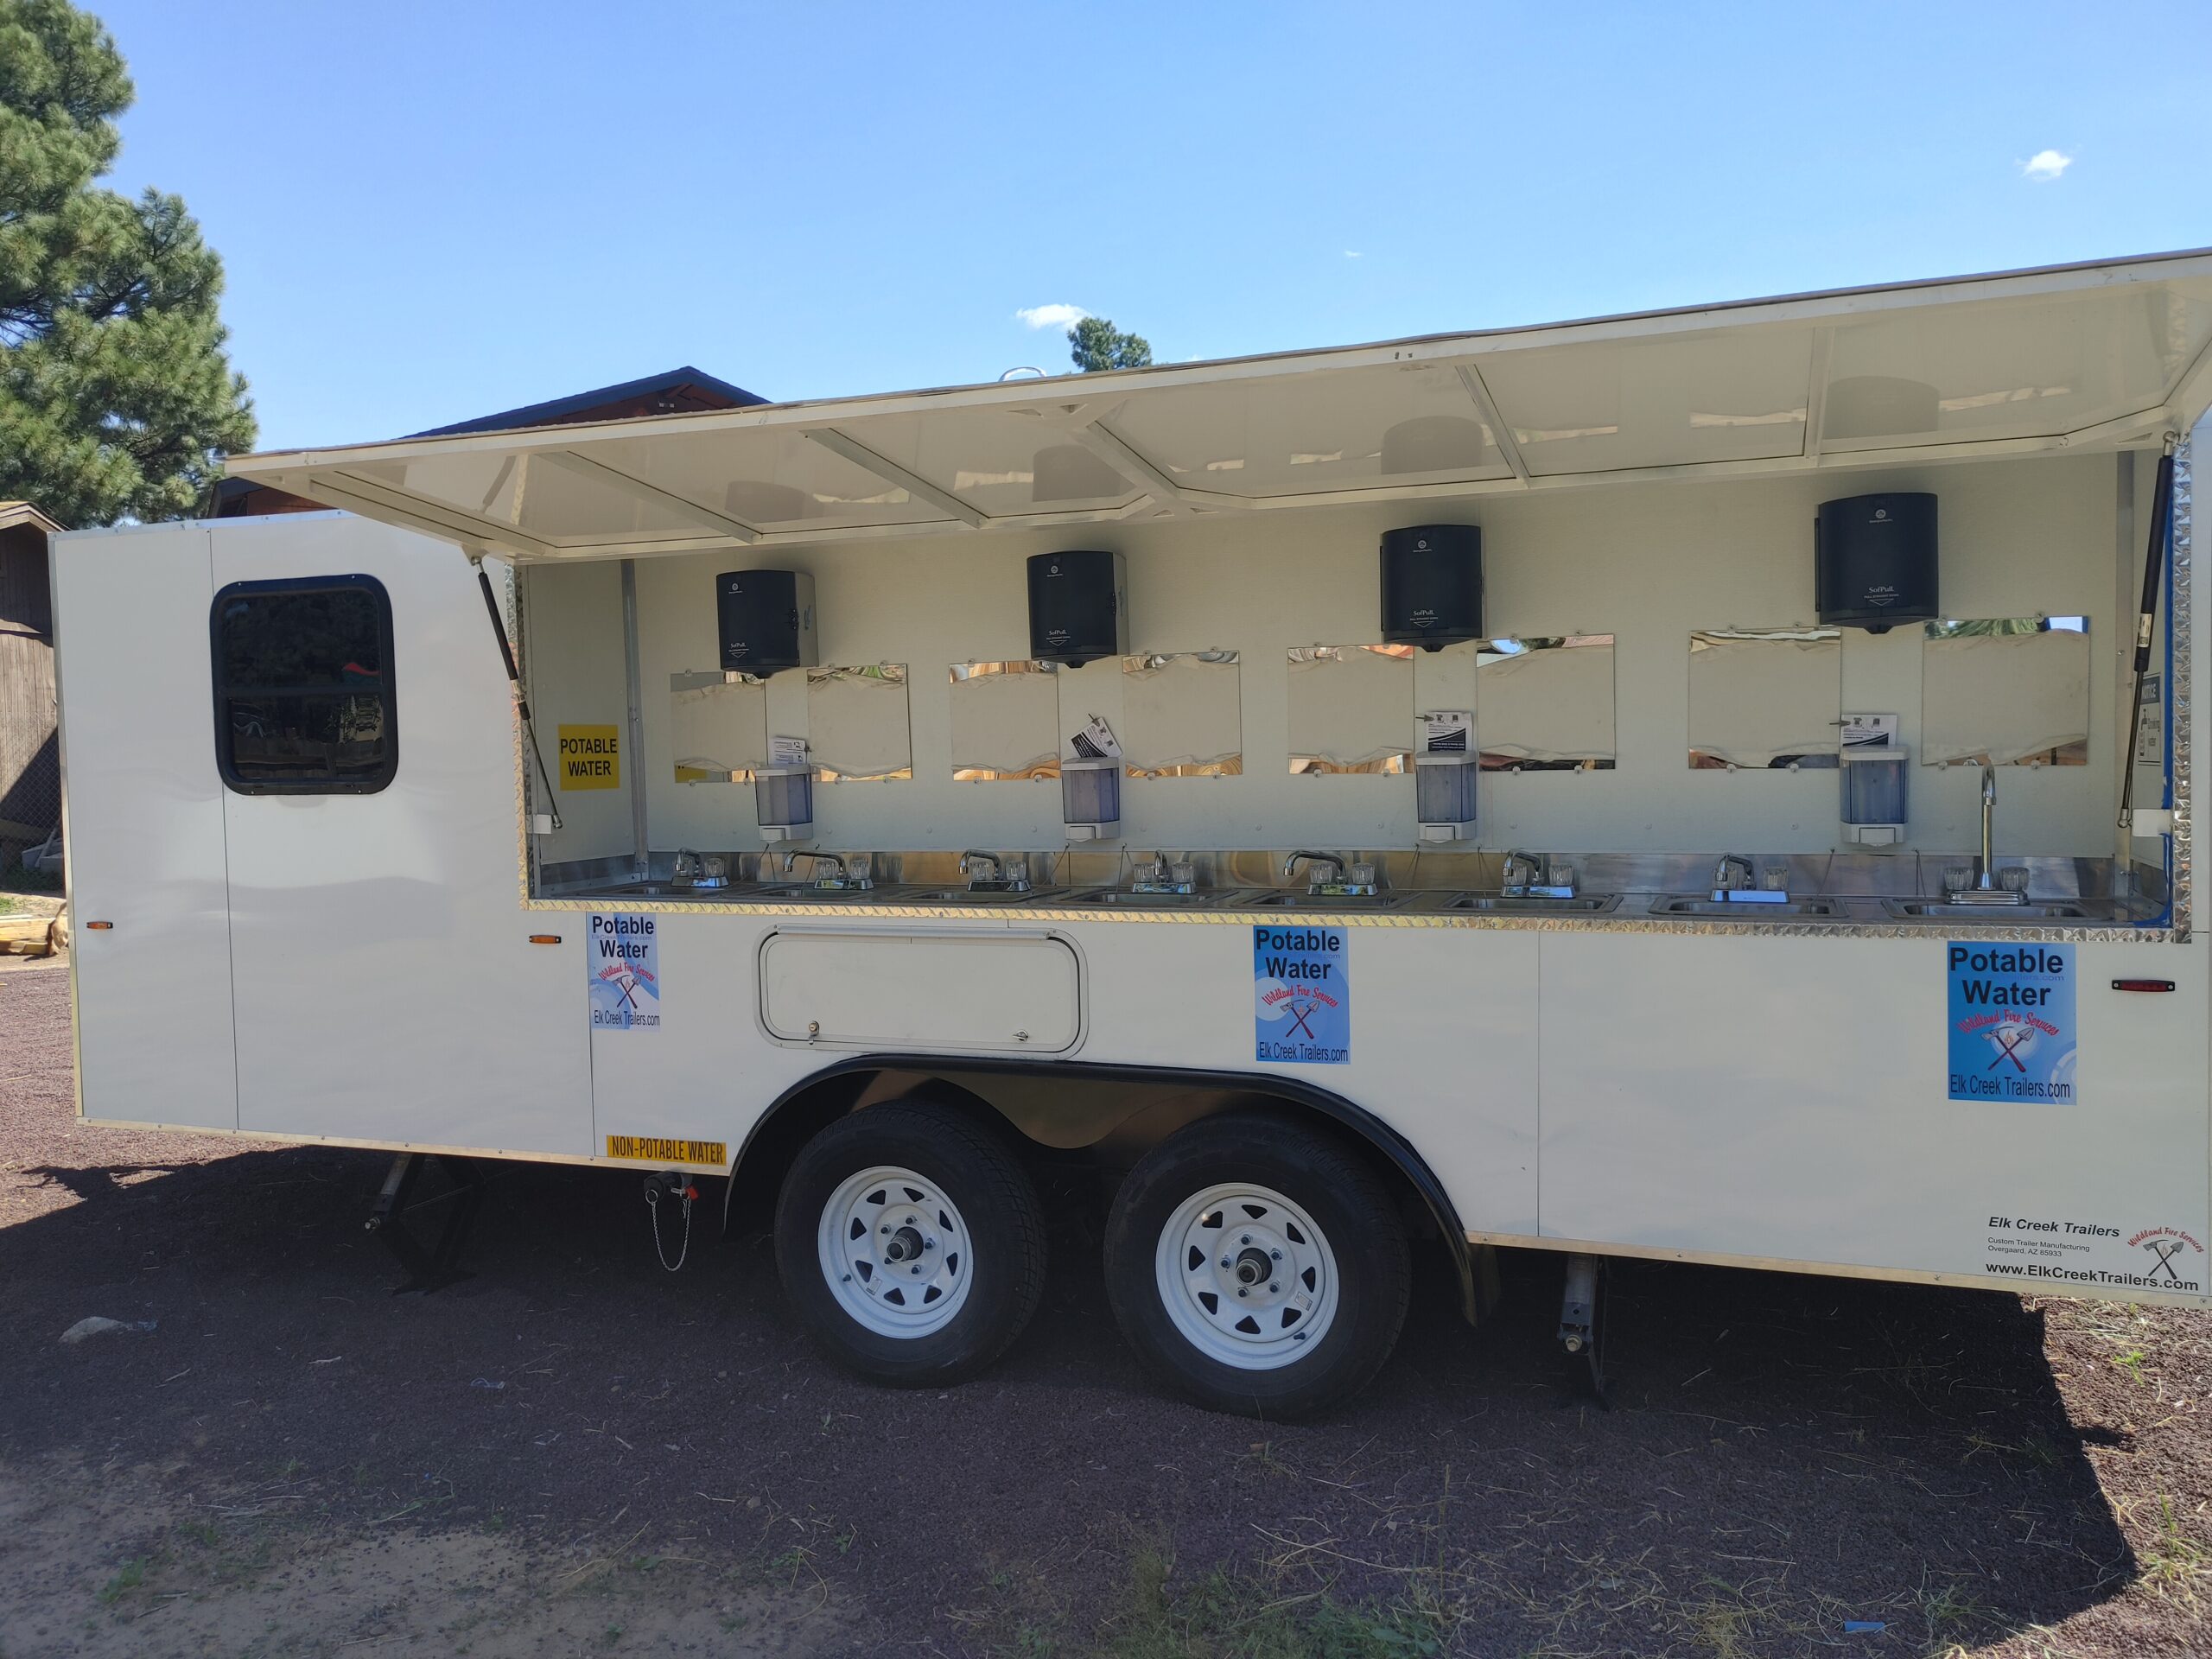 Side view of an 8 sink trailer with stainless steel sinks.